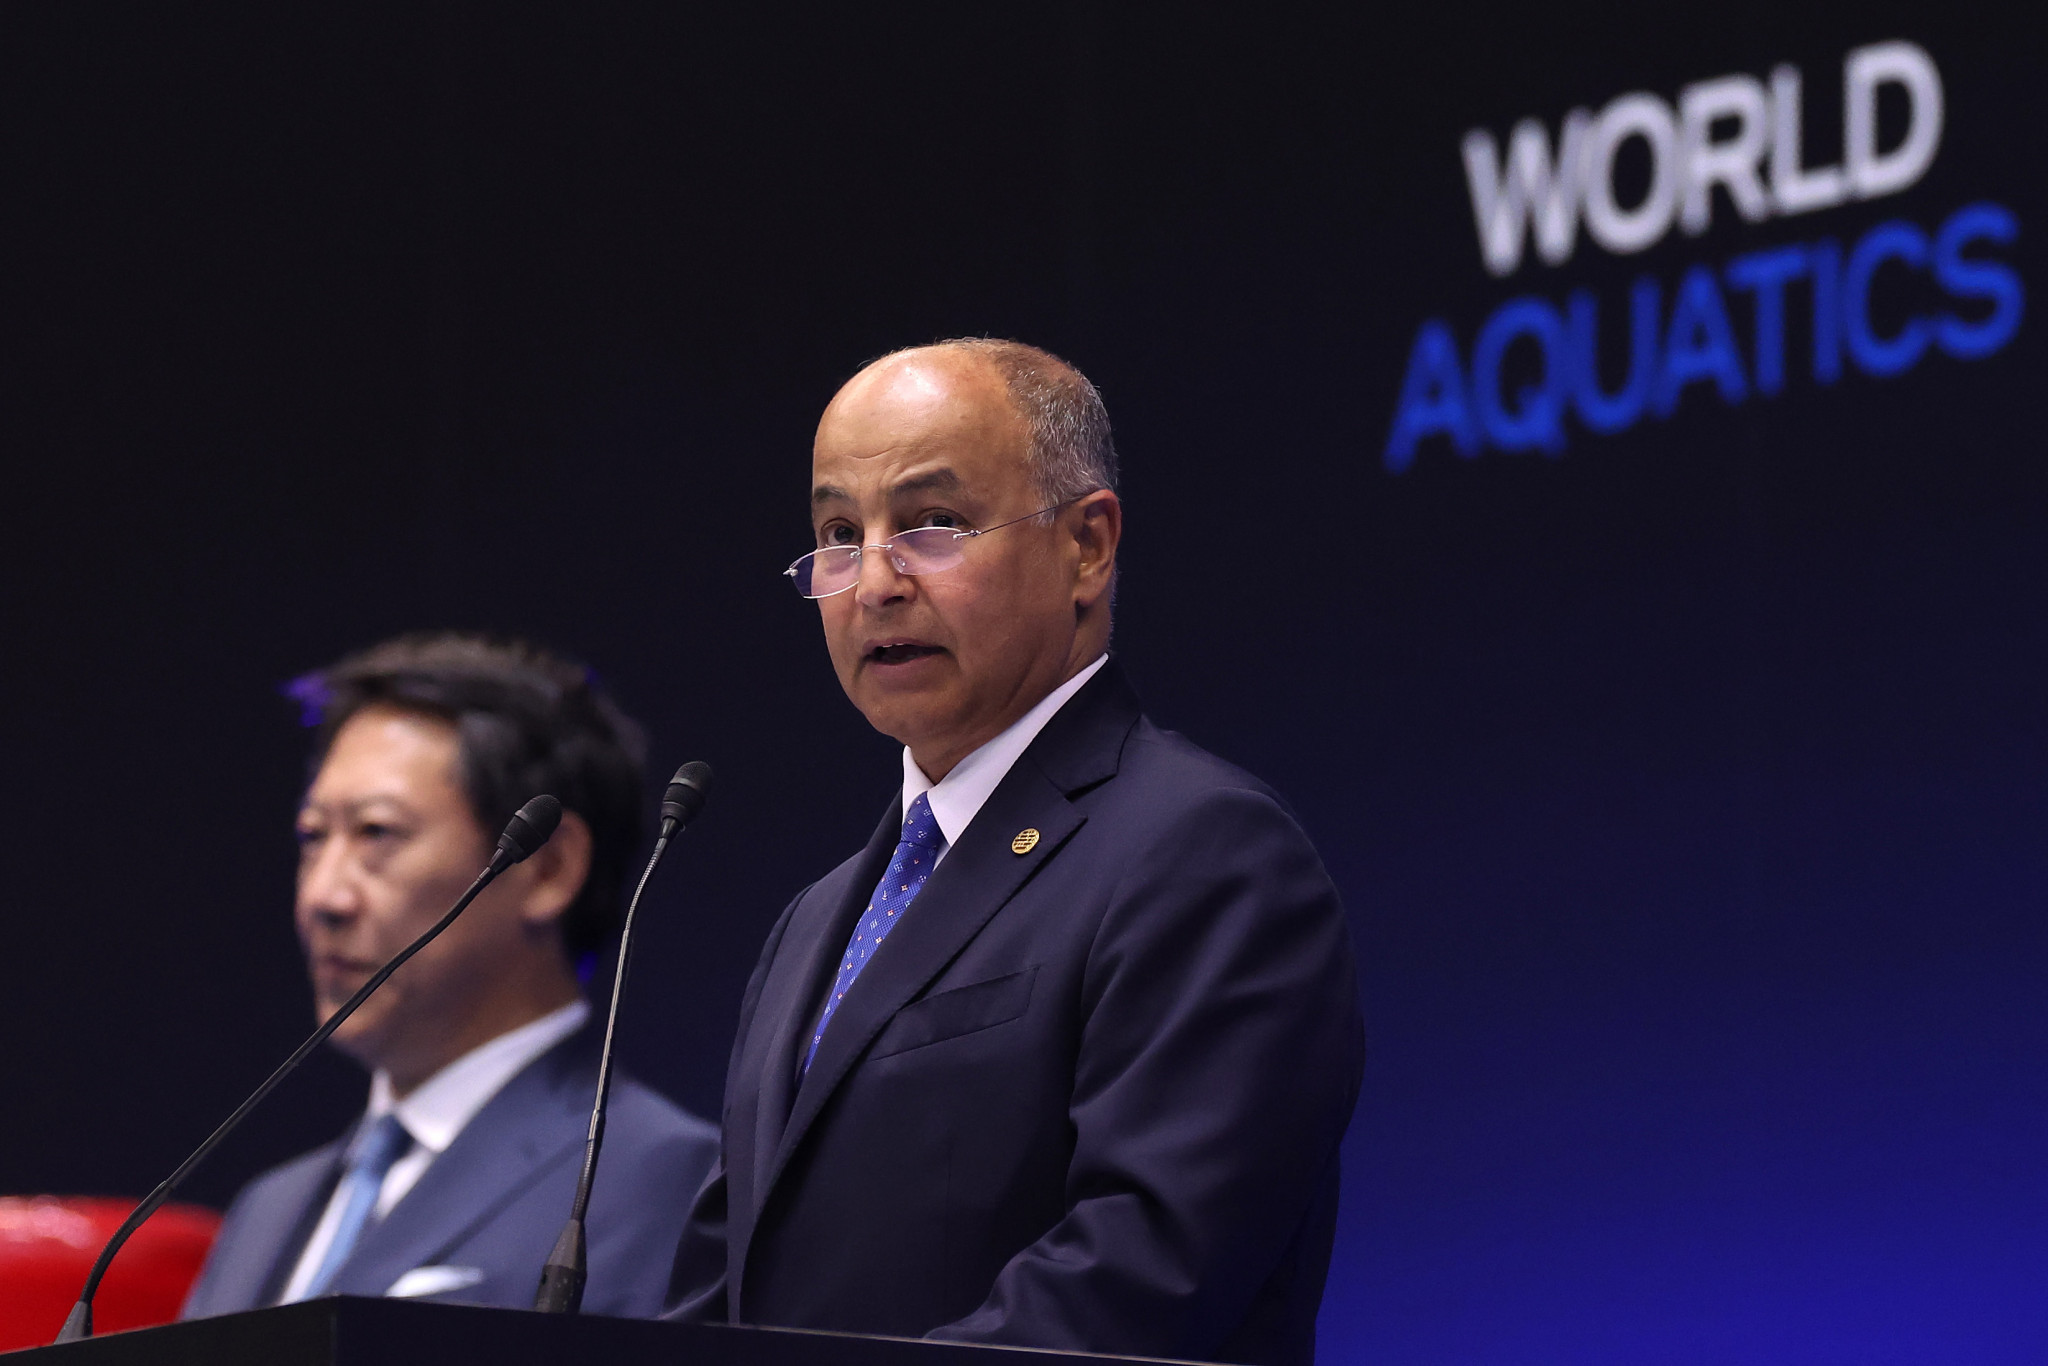 World Aquatics President Husain Al-Musallam has pushed for an open category to ensure that all athletes have the chance to compete at an elite level ©Getty Images